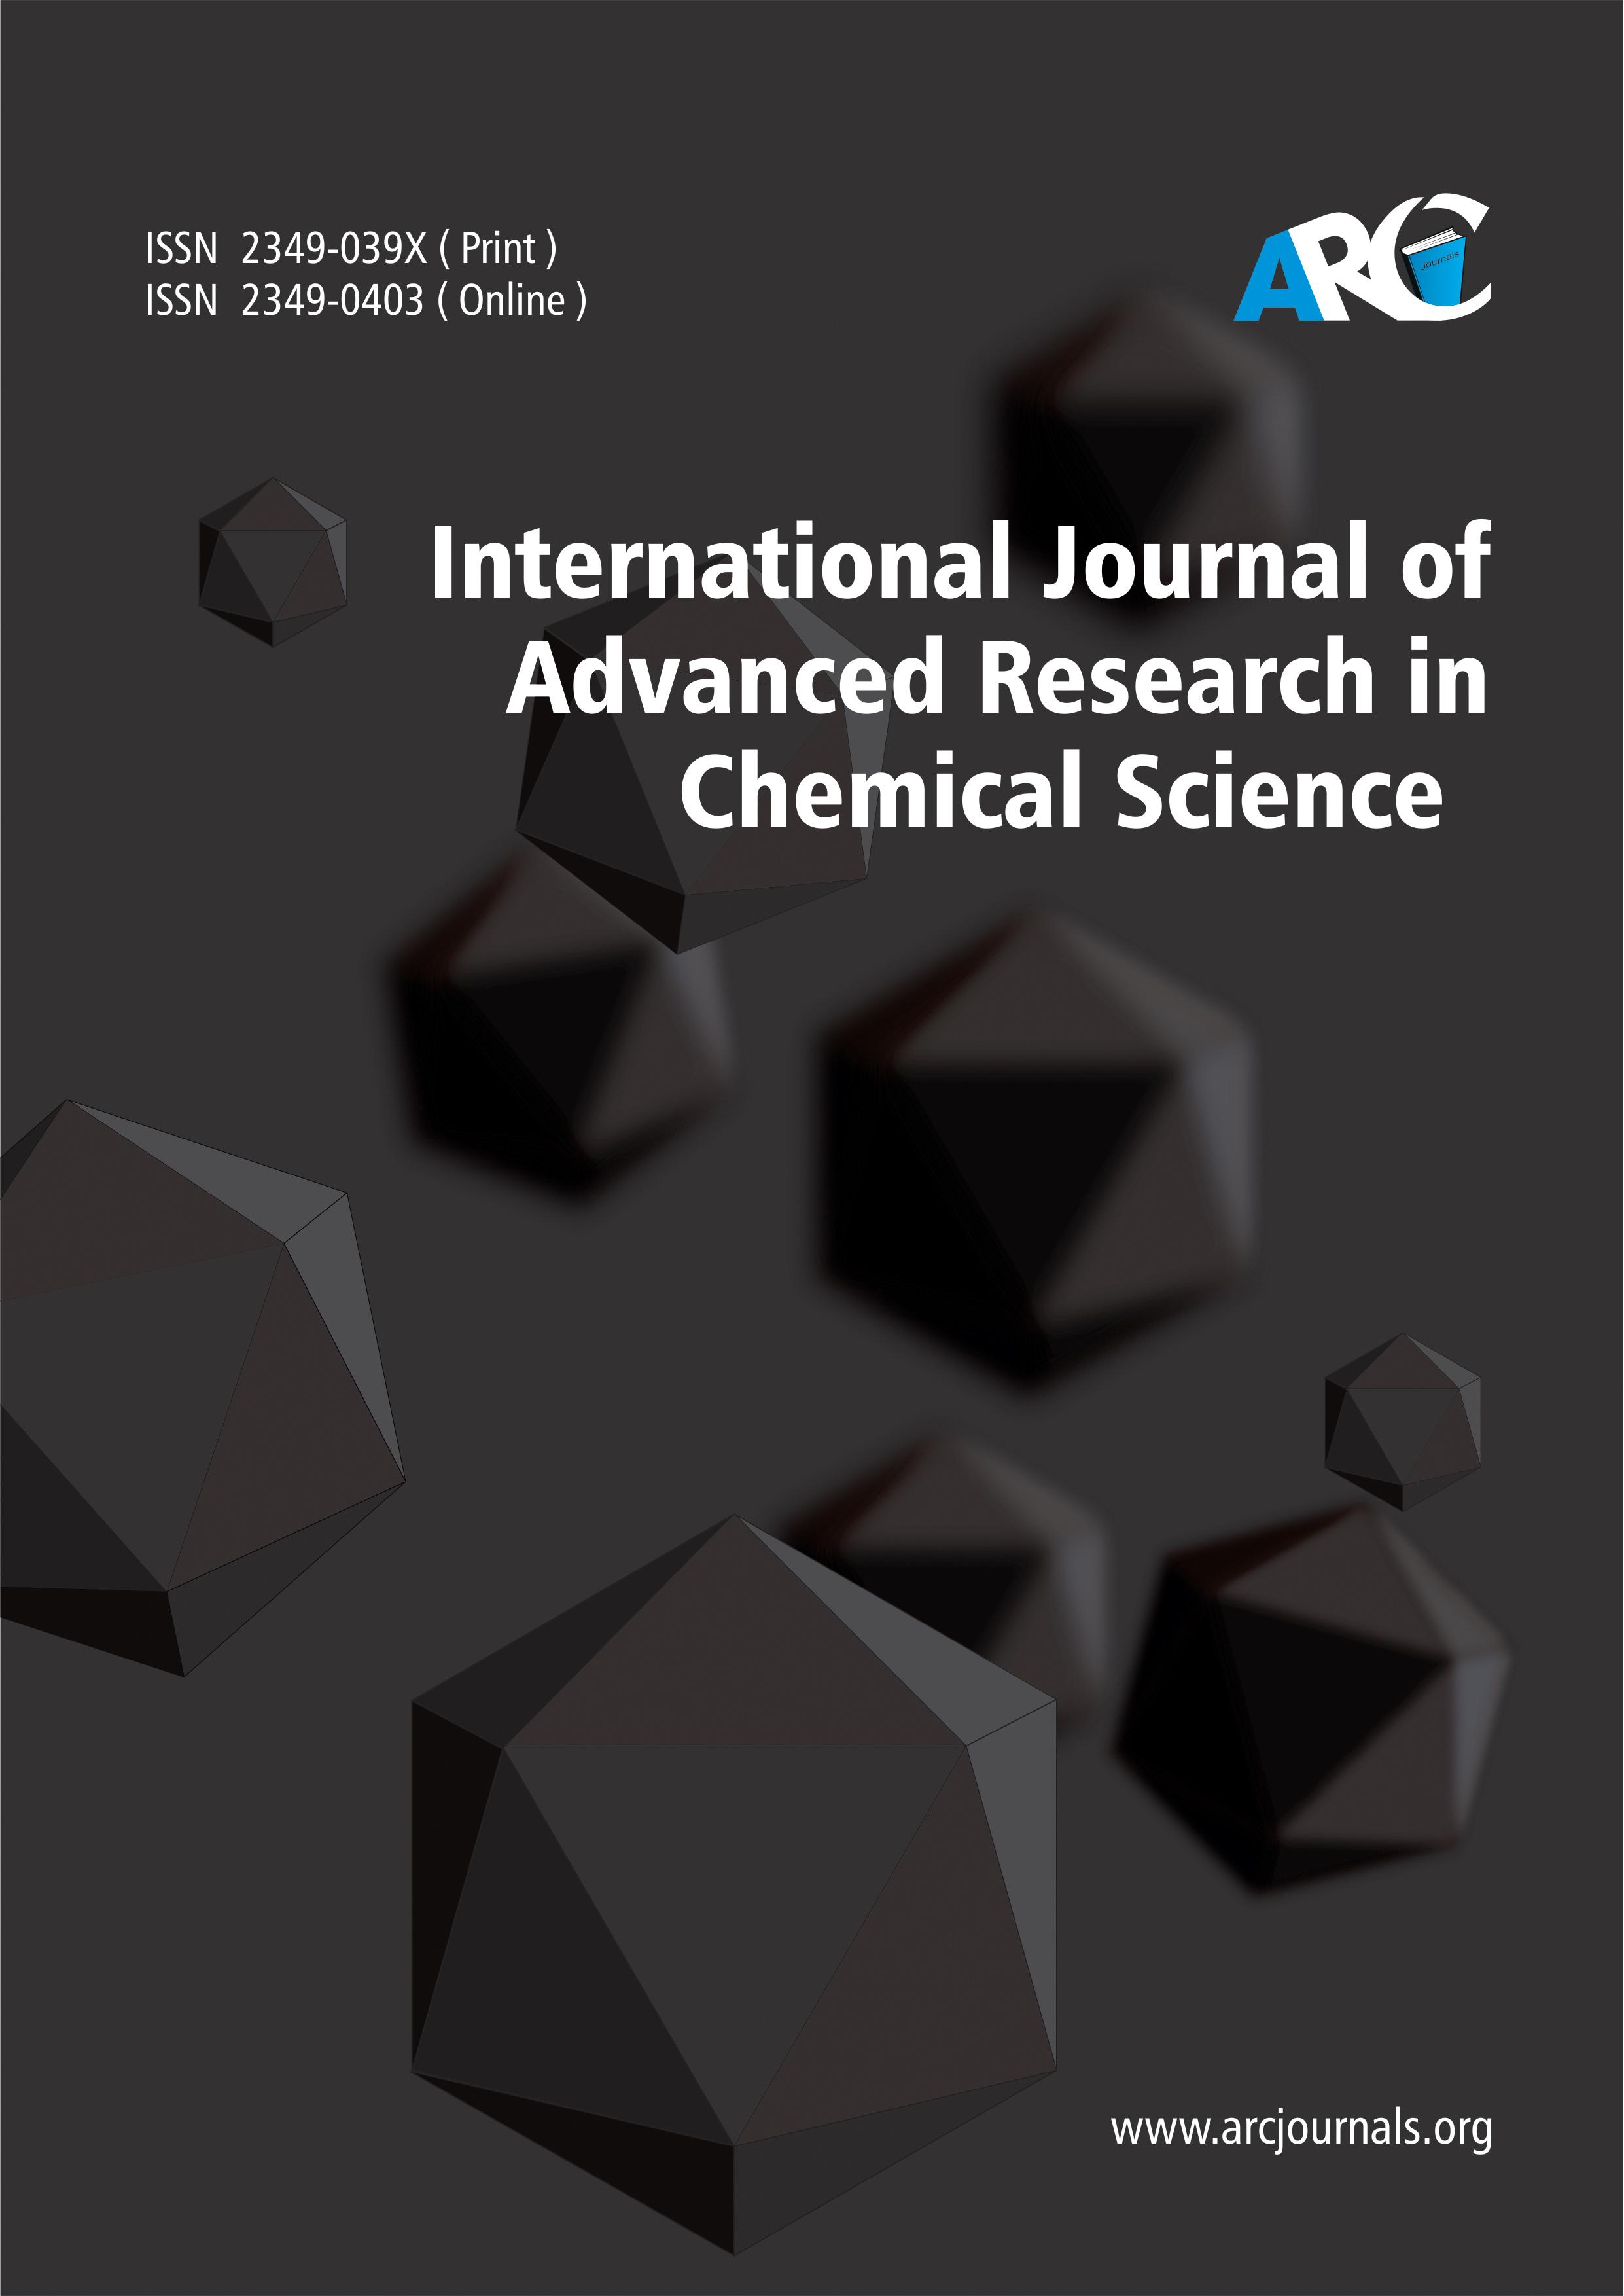 Chemical Science Journals | ARC Journals | Top Chemistry ...